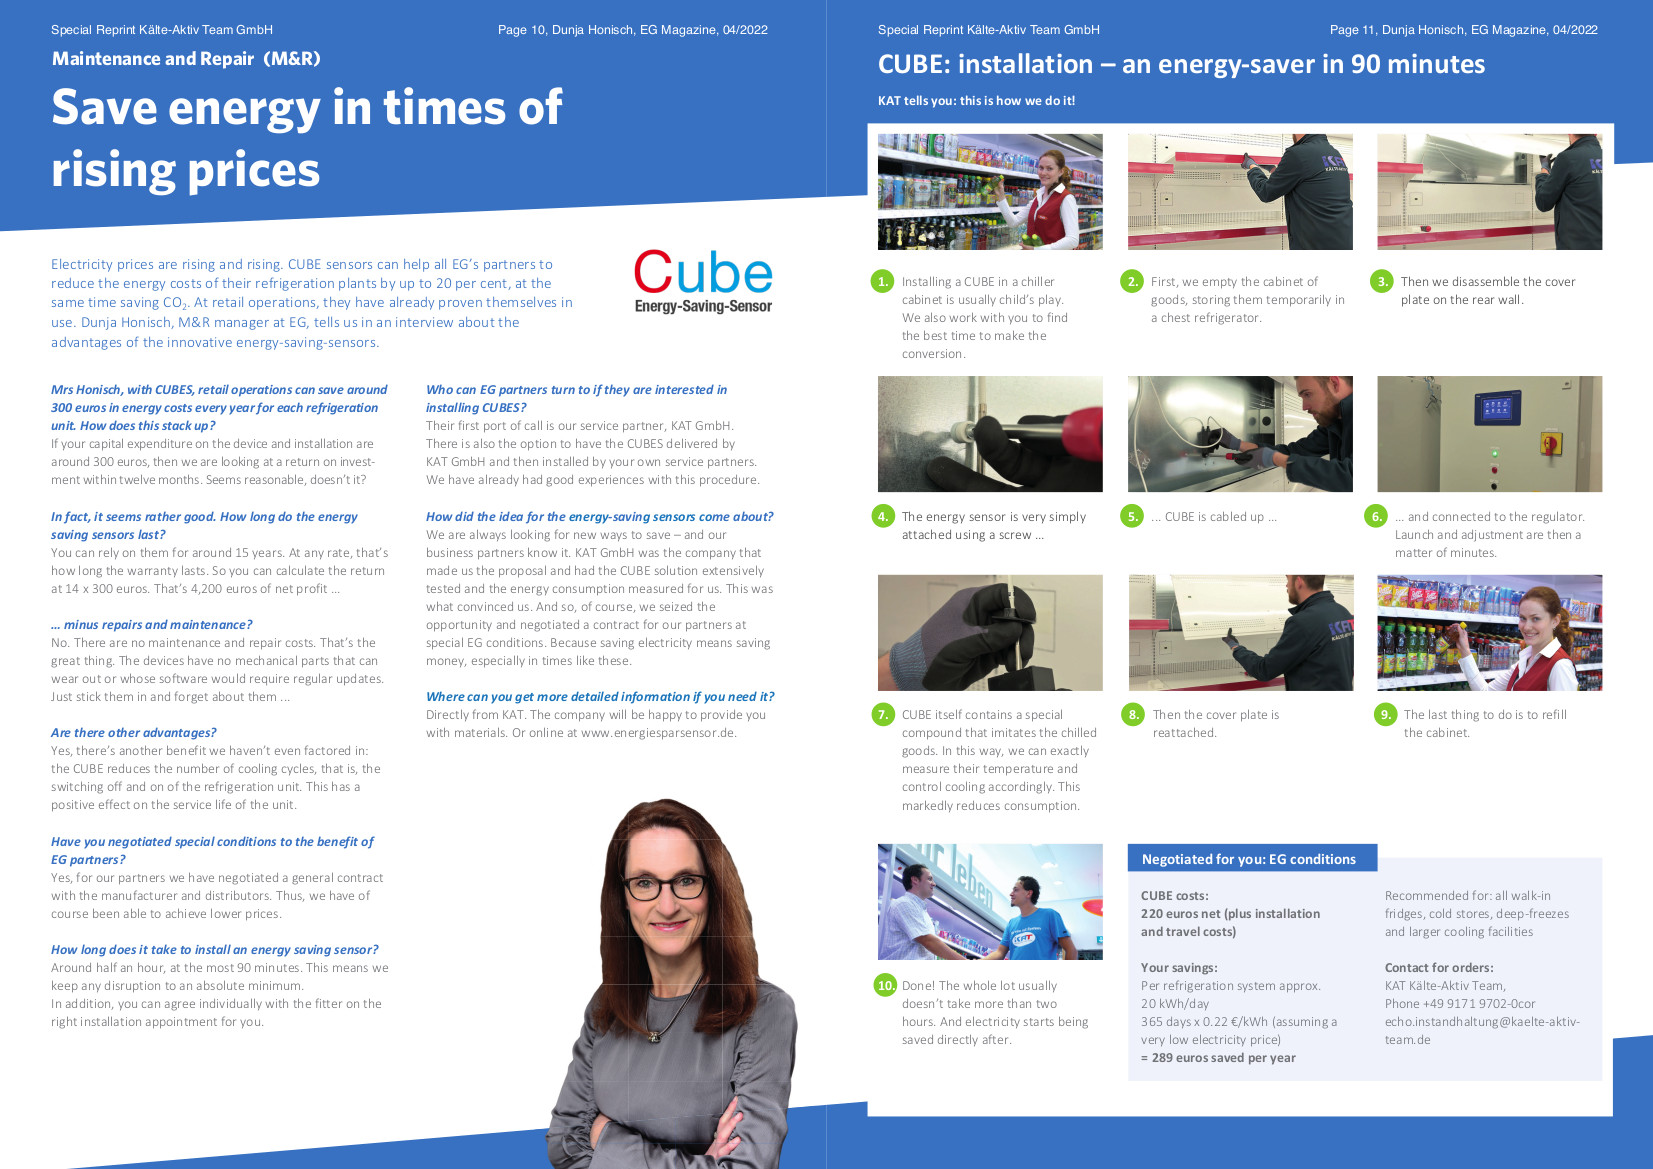 Interview with Mrs. Dunja Honisch: Saving energy with rising electricity prices and installing CUBE in 90 minutes.